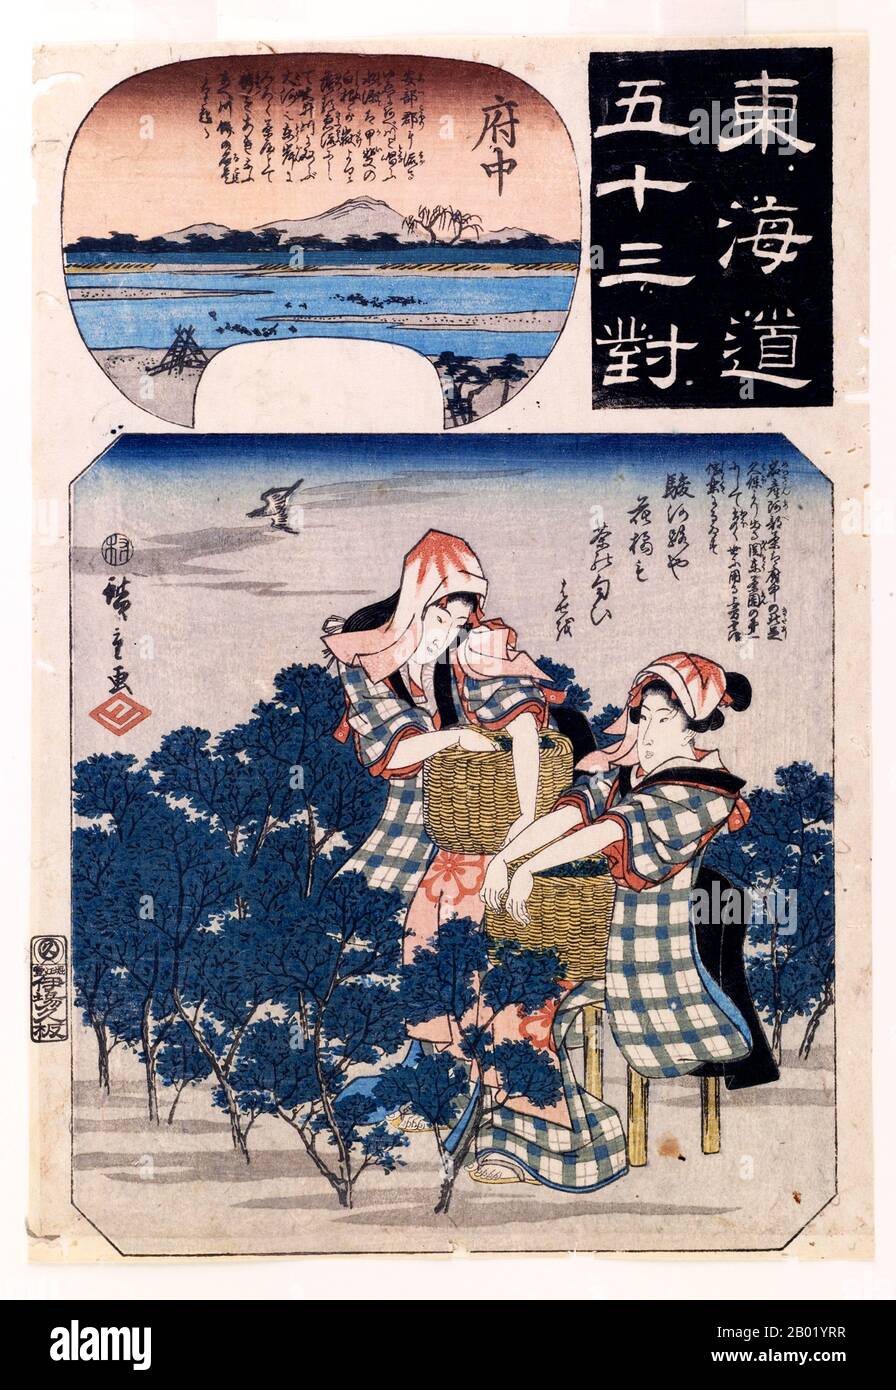 Dressed in elaborate cotton kimonos, two girls appear  over-dressed for the task at hand. Beneath their tie-dyed head coverings, they each sport hairstyles of the highest urban fashion.  These are elegant urban women costumed to play the roles of tea plantation workers in the famed Fuchu region. Hiroshige is presenting his urban patrons with a fantasy that appeals both to their sense of fashion and to their love of fine tea. Stock Photo